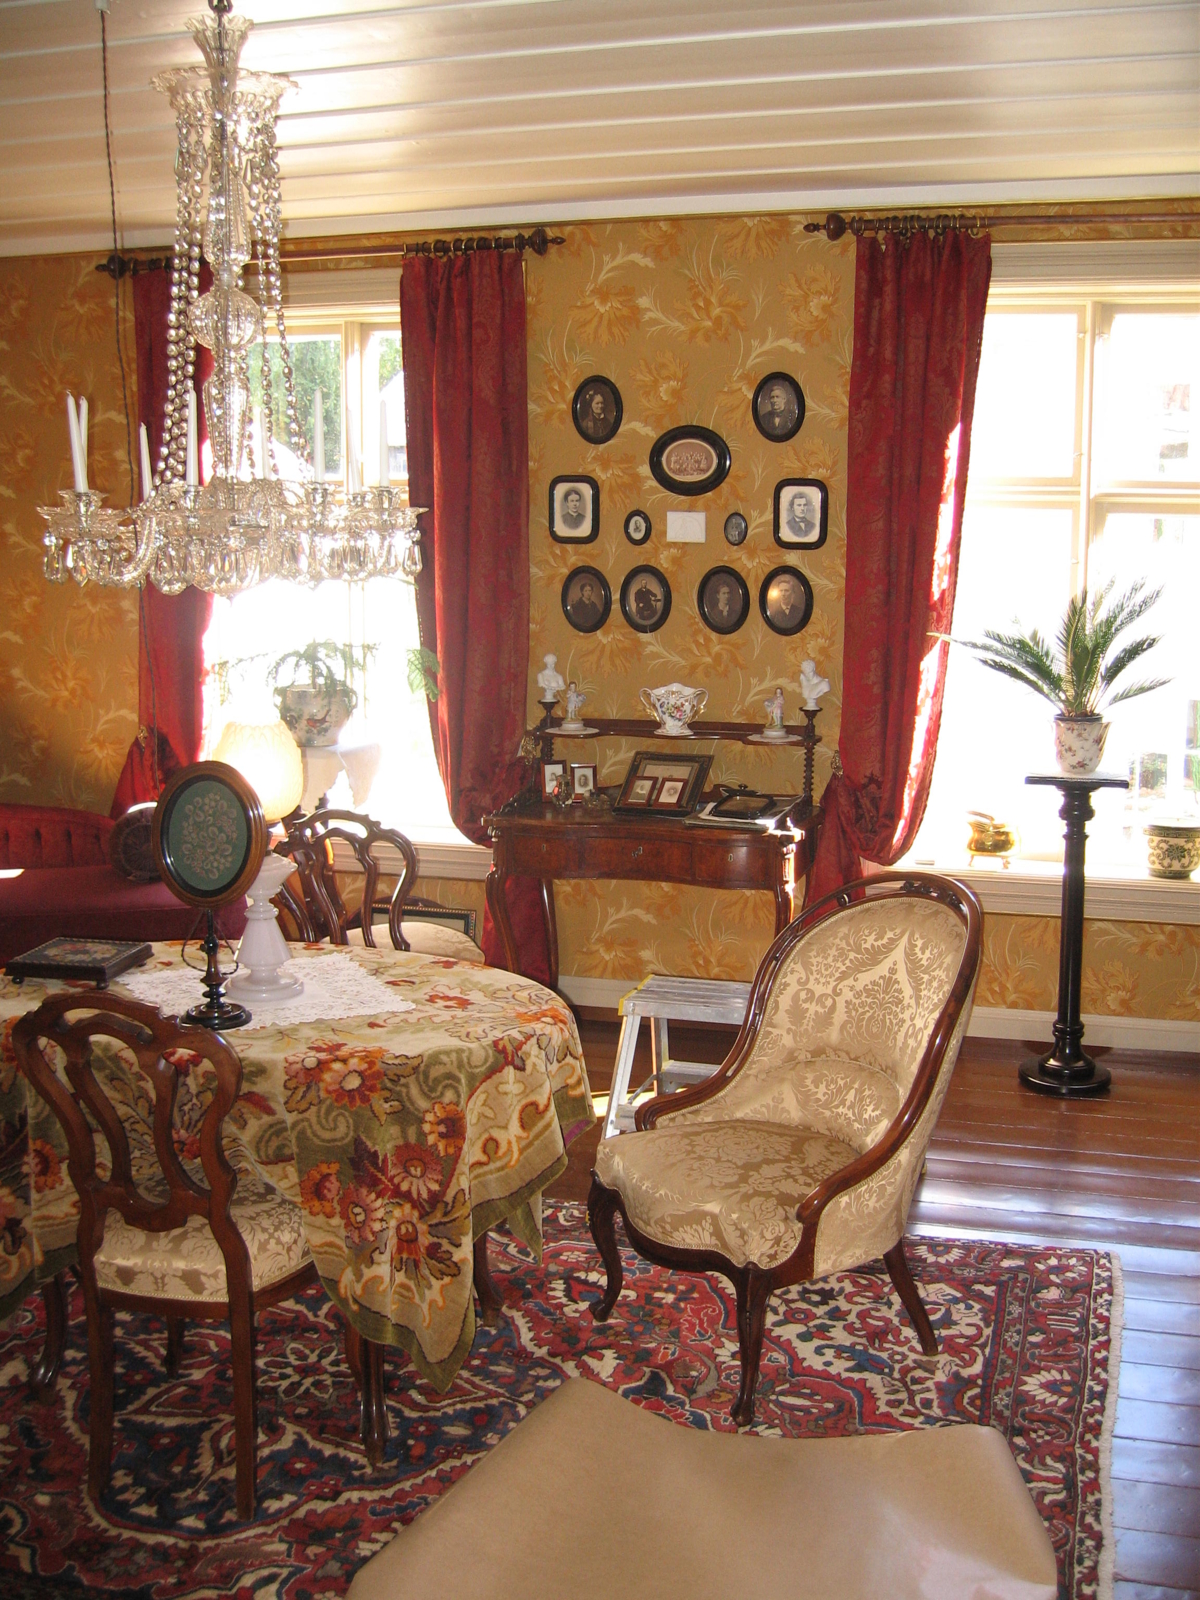 The pharmacist's apartment shows how the city's&nbsp;upper class lived around the early 1900's. Photo: K&aring;re Hosar/Maihaugen.

